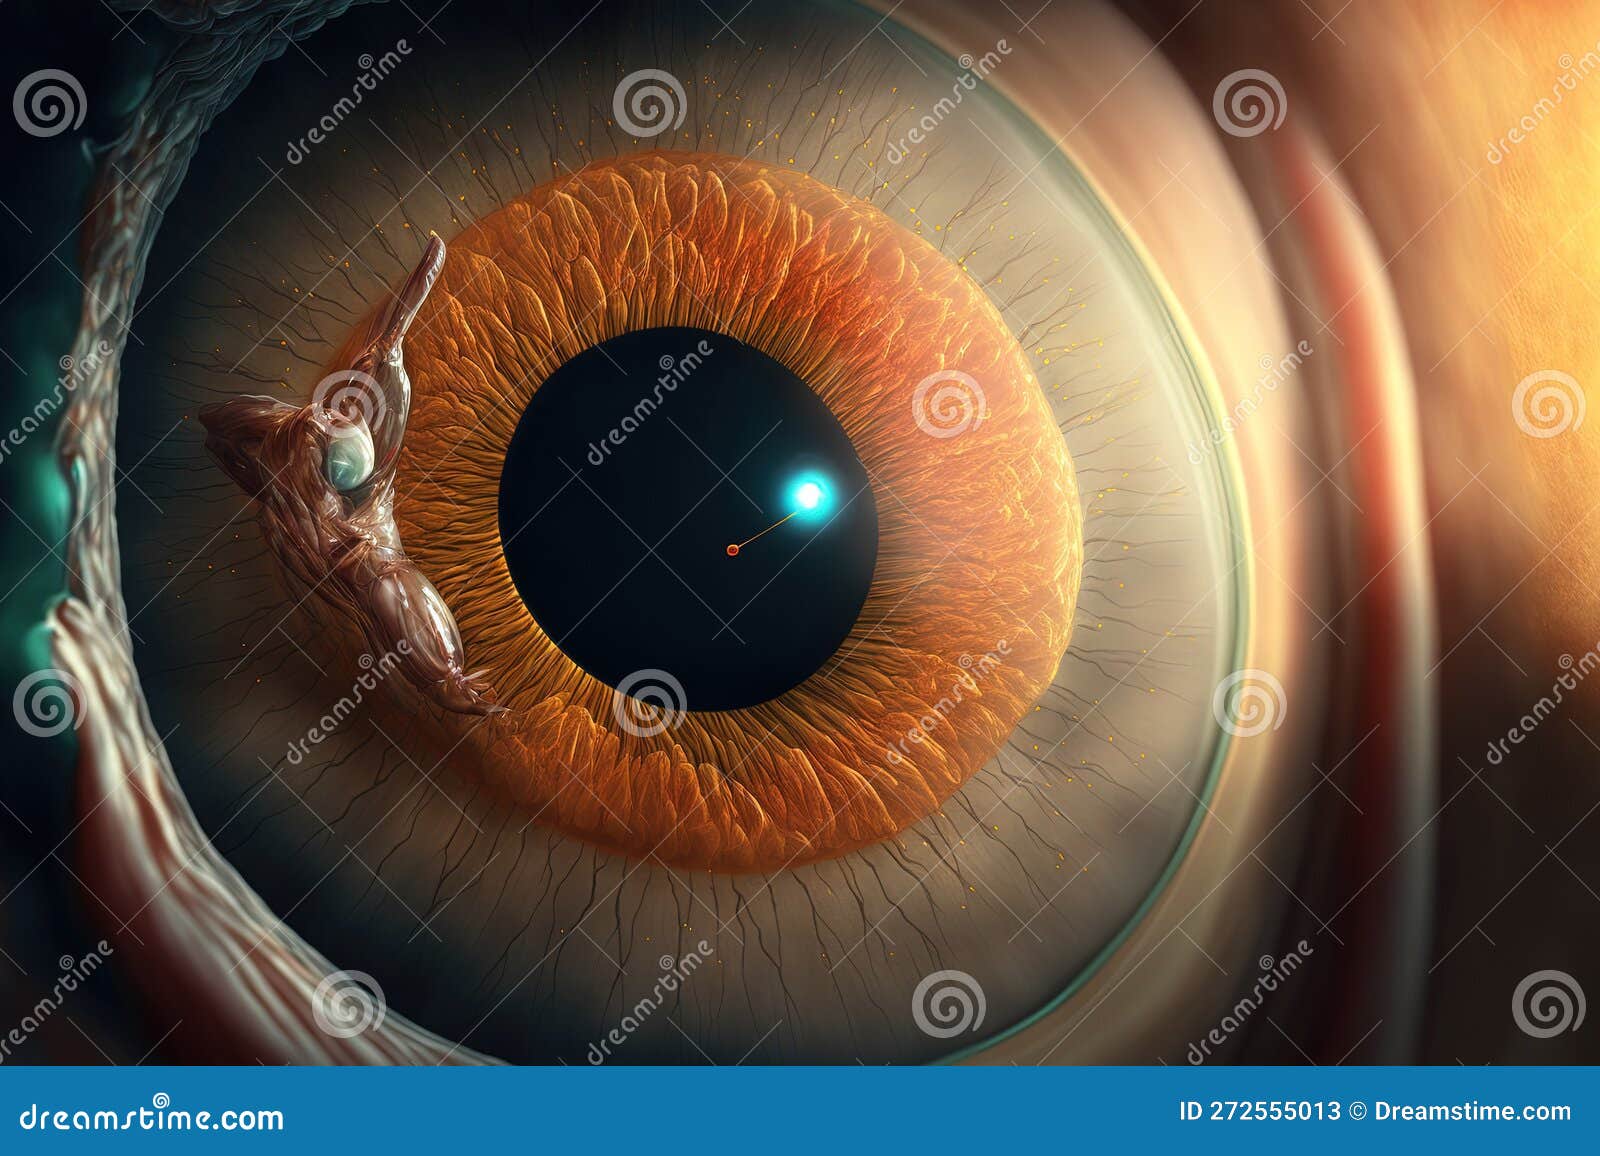 during an eye exam, the advanced pterygium is magnified